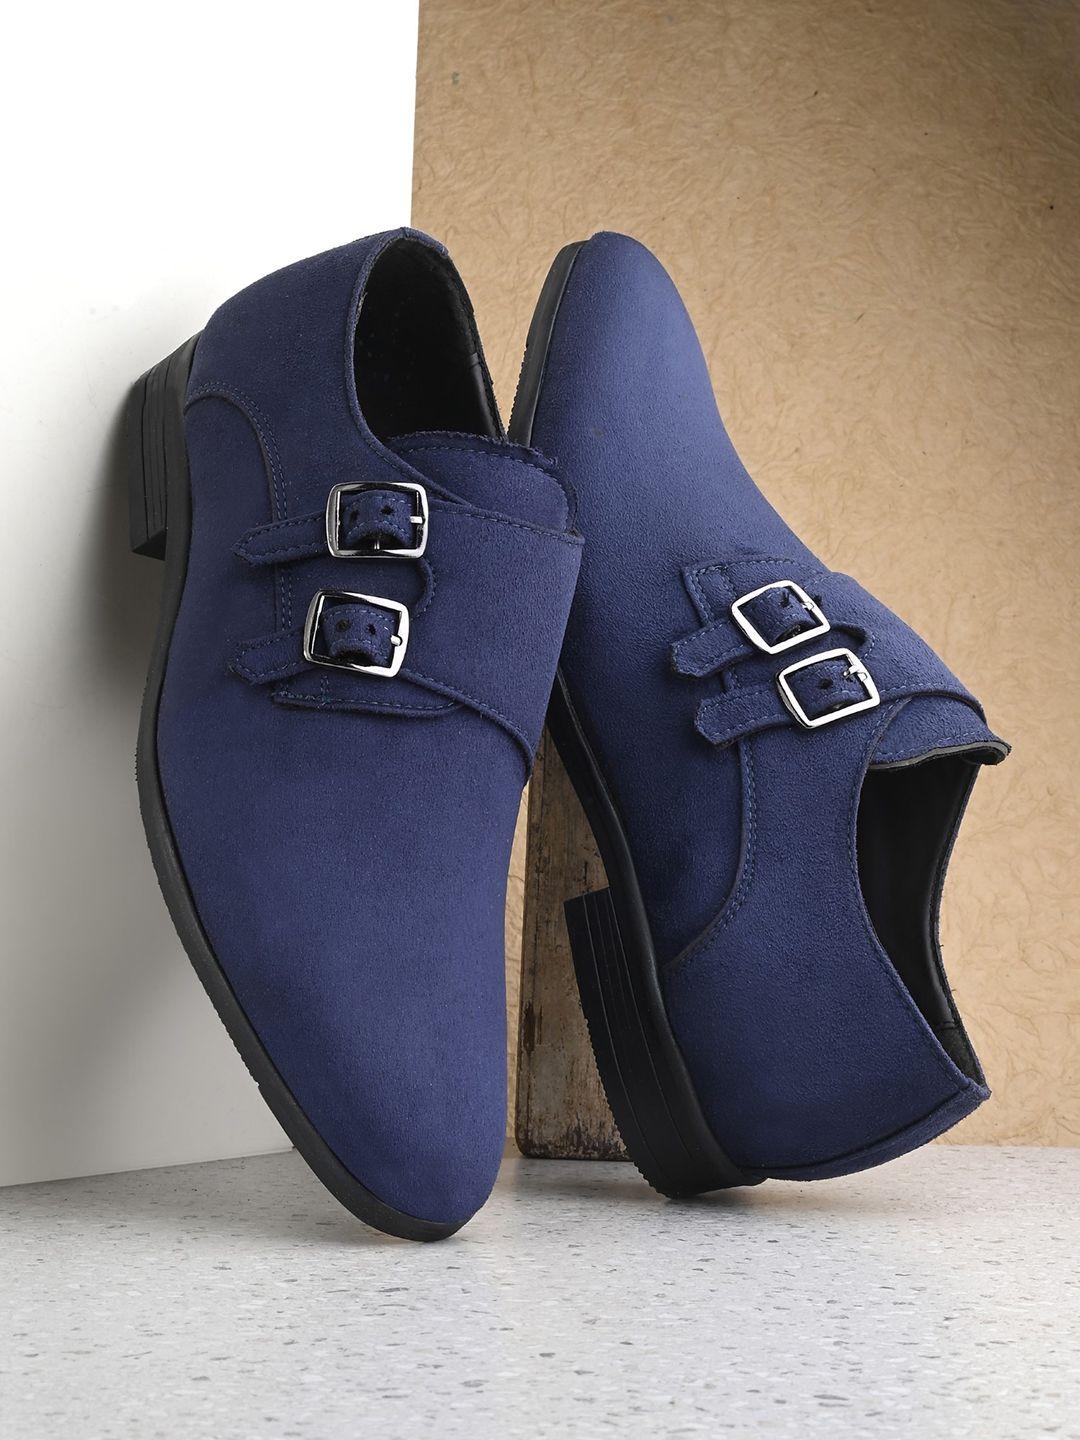 house-of-pataudi-men-buckled-formal-monk-shoes